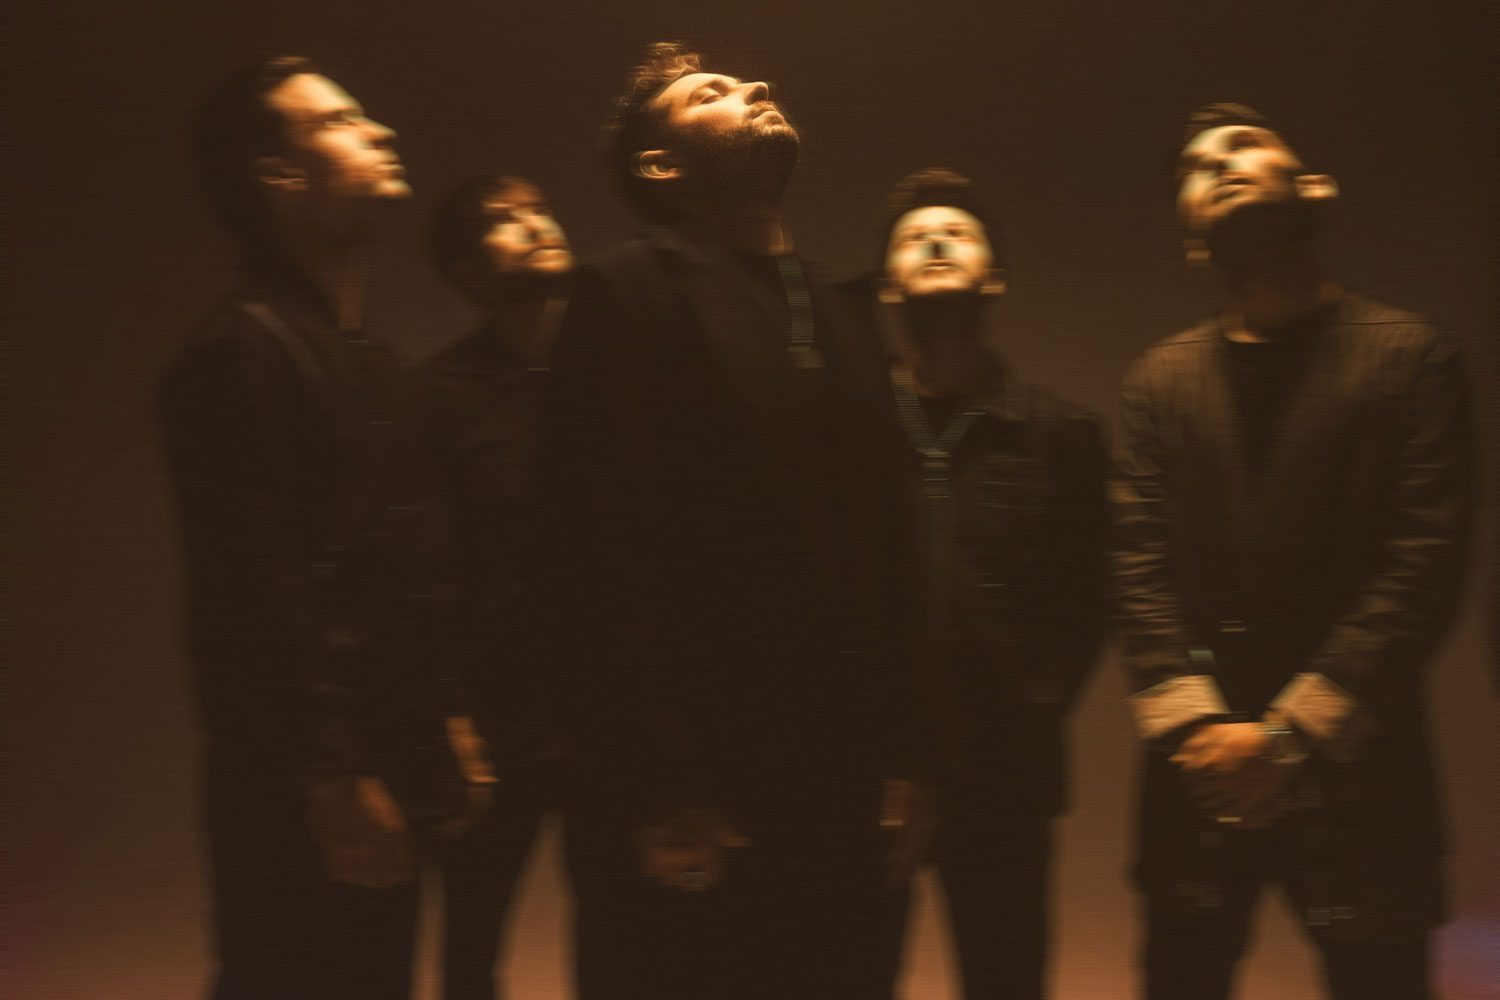 YOU ME AT SIX ANNOUNCE NEW ALBUM ‘SUCKAPUNCH’ + RELEASE NEW SINGLE “BEAUTIFUL WAY”